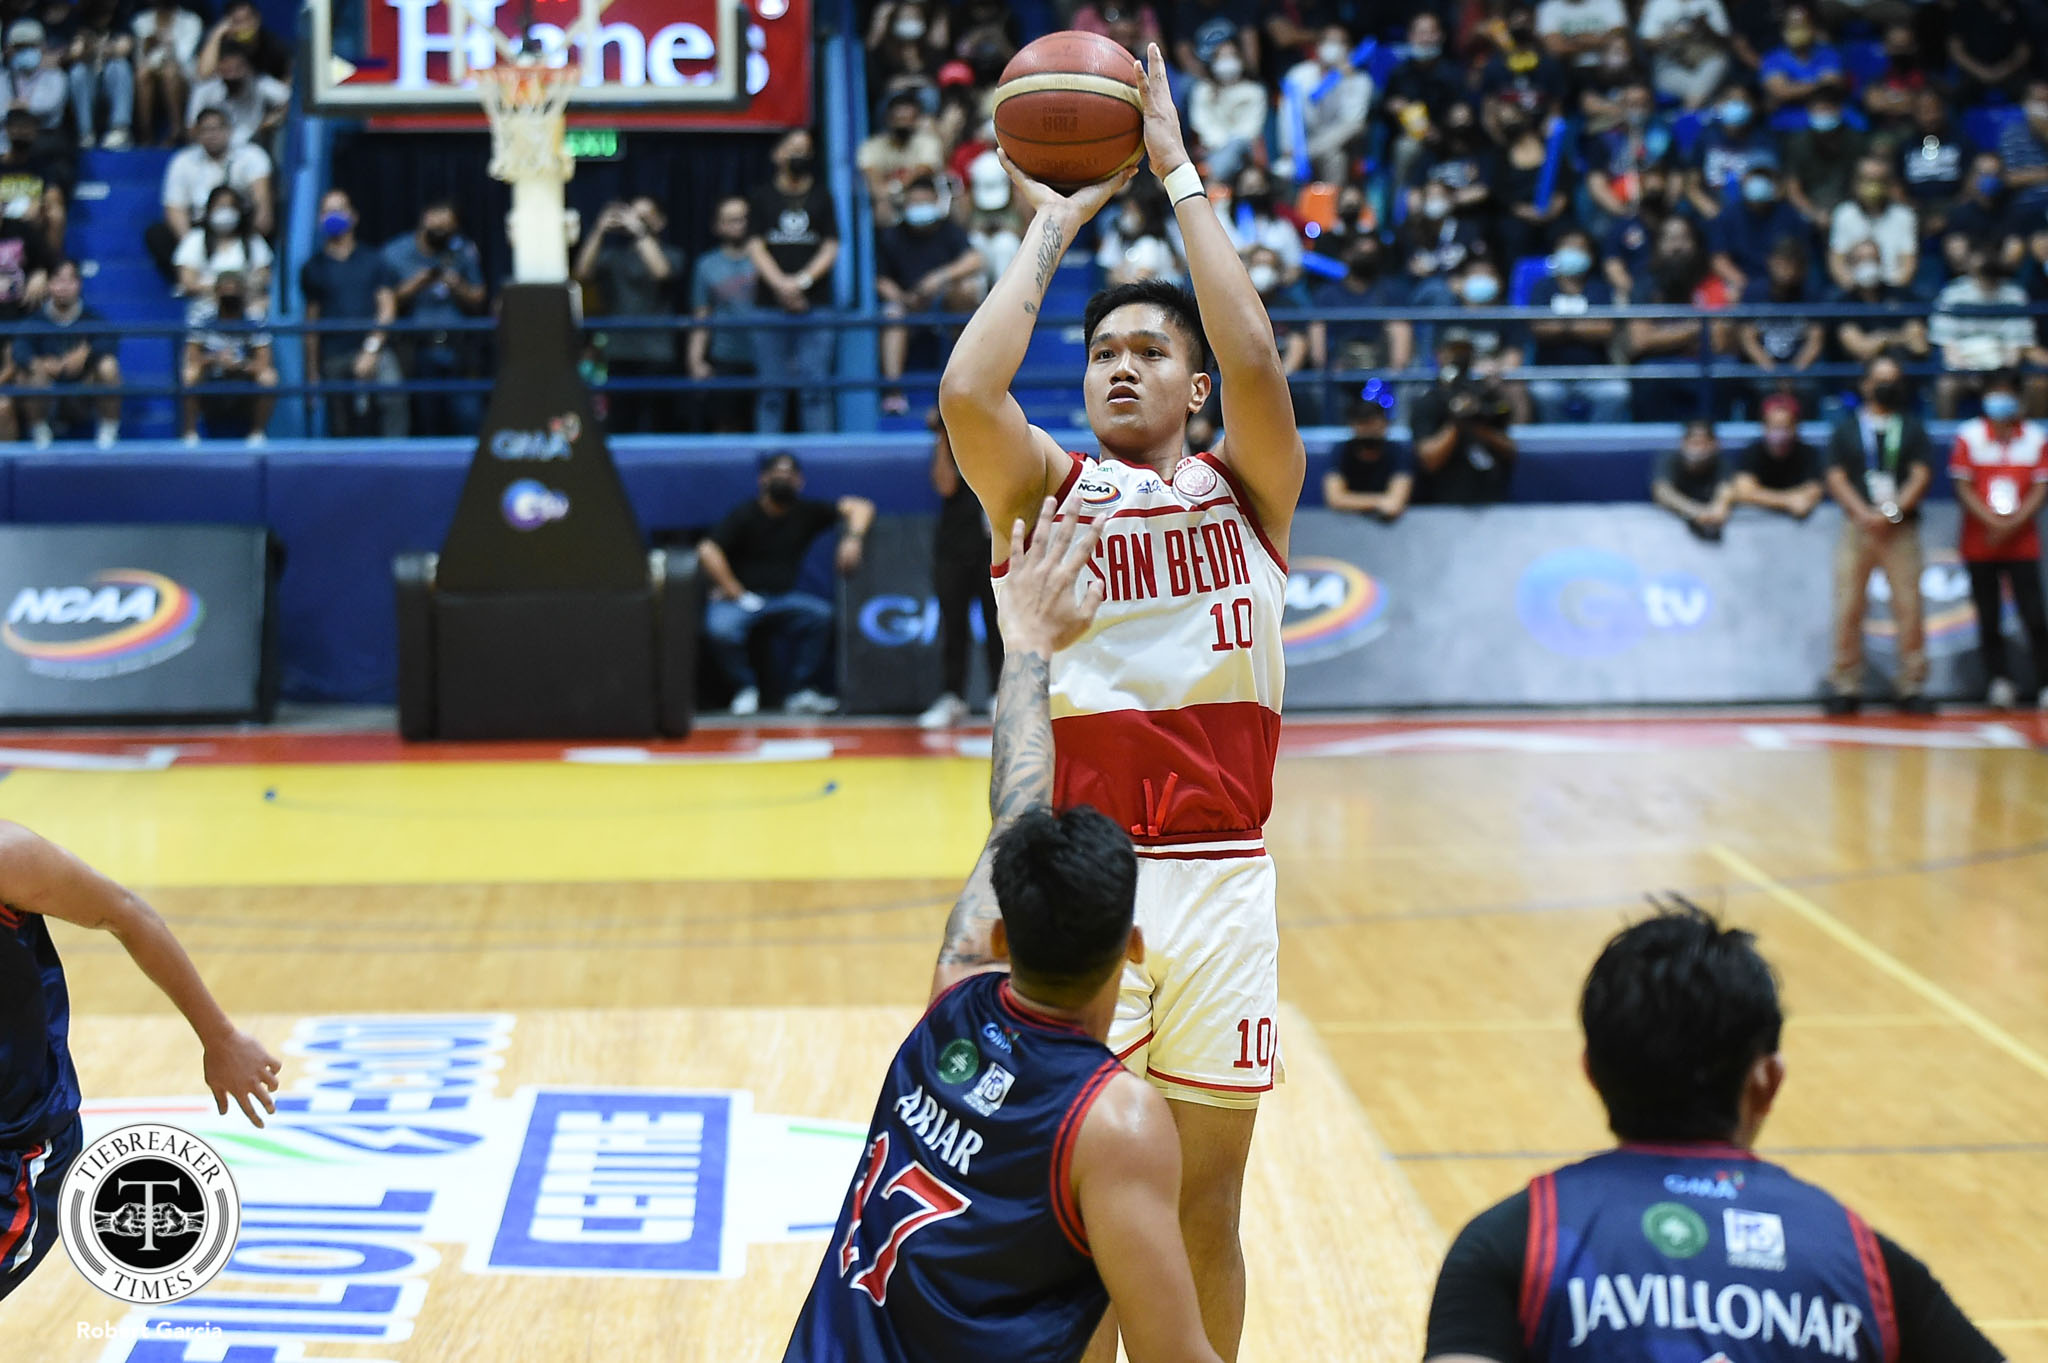 NCAA-98-SBU-vs-CSJL-Damie-Cuntapay-2 With 'extra curriculars' out of the way, Damie Cuntapay starts to flourish in San Beda Basketball NCAA News SBC  - philippine sports news